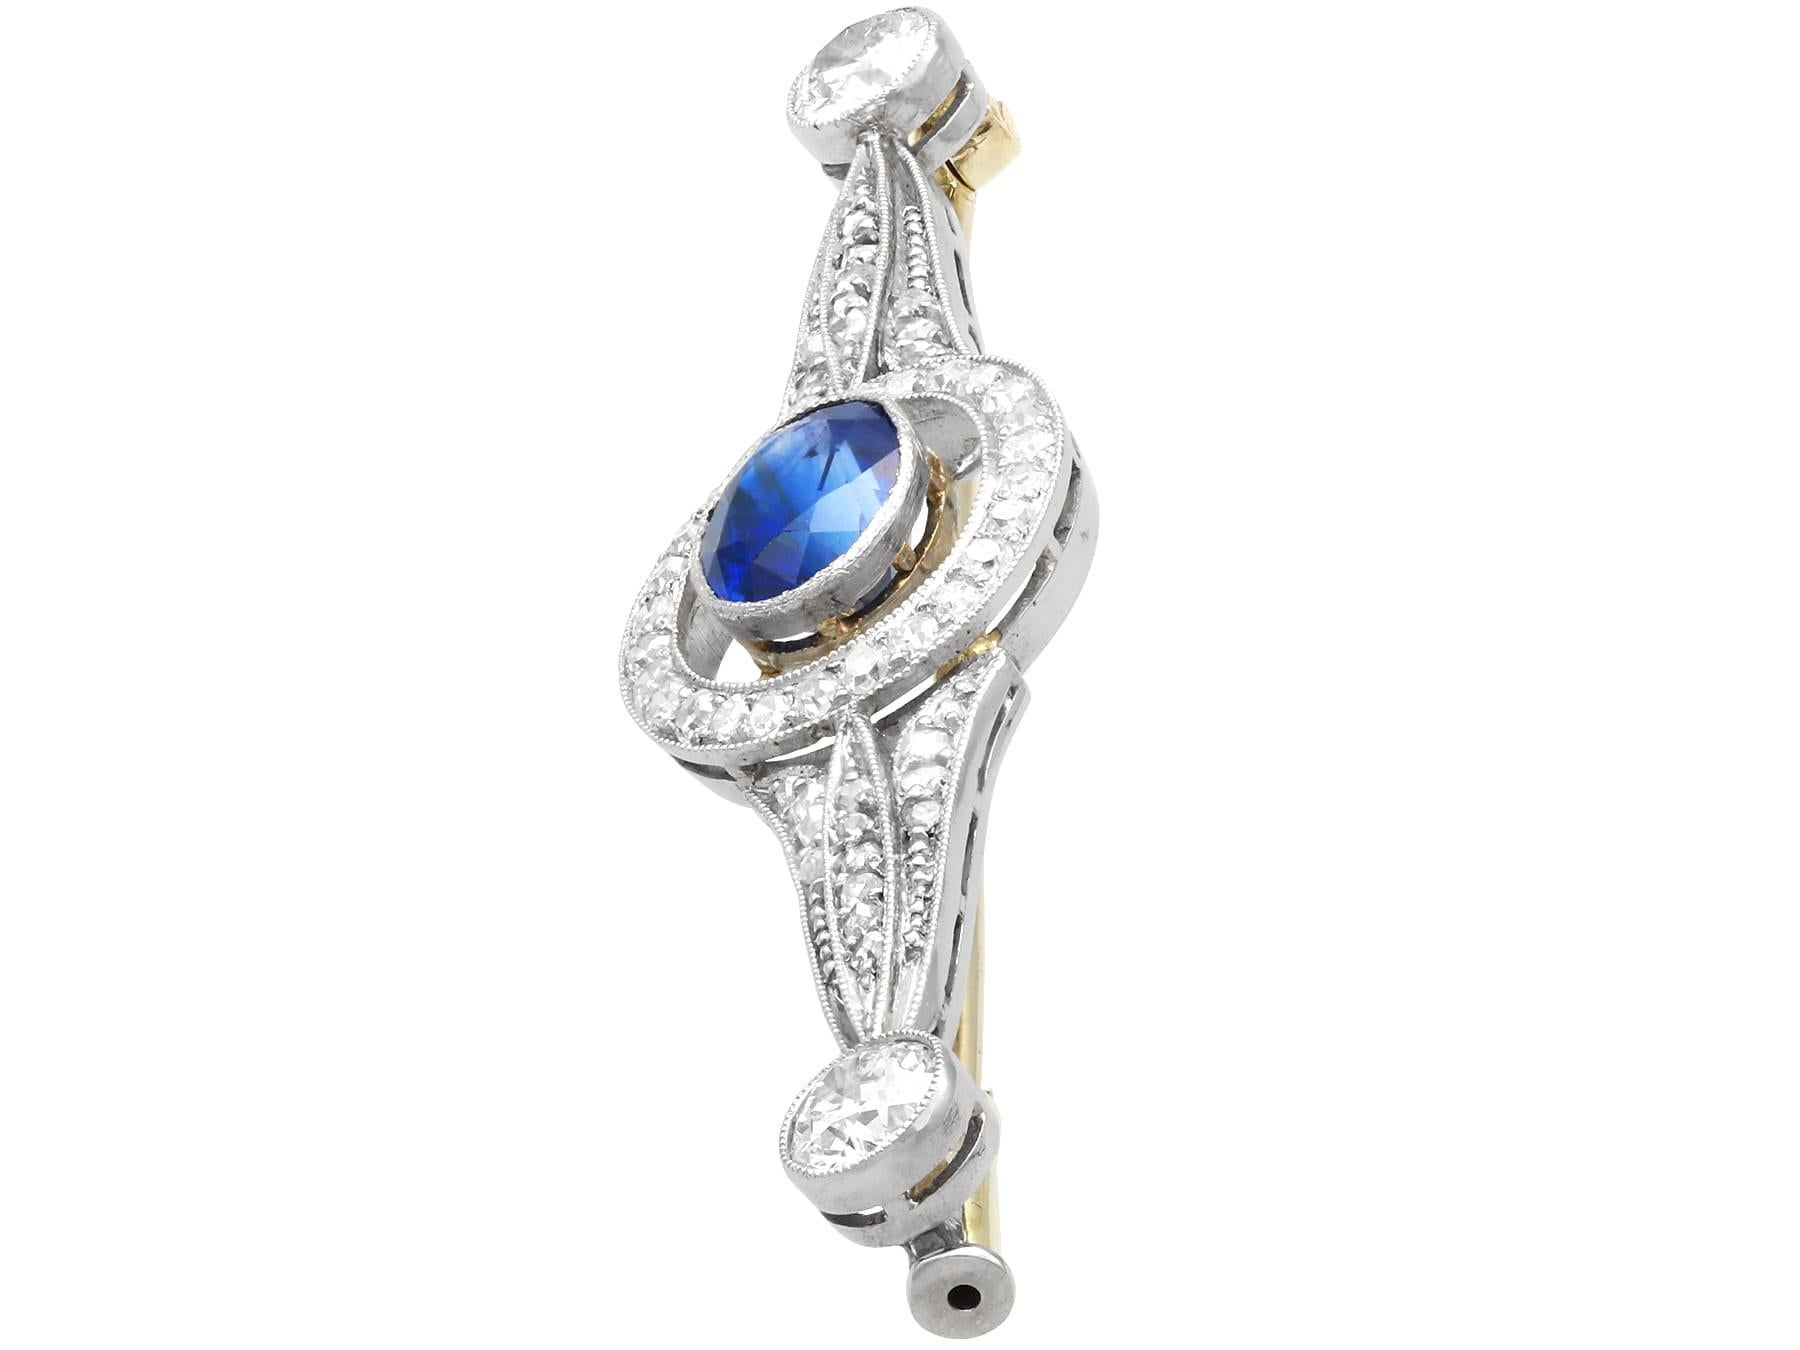 Oval Cut Antique 1.25Ct Sapphire 2.34Ct Diamond and Platinum Brooch Circa 1925 For Sale